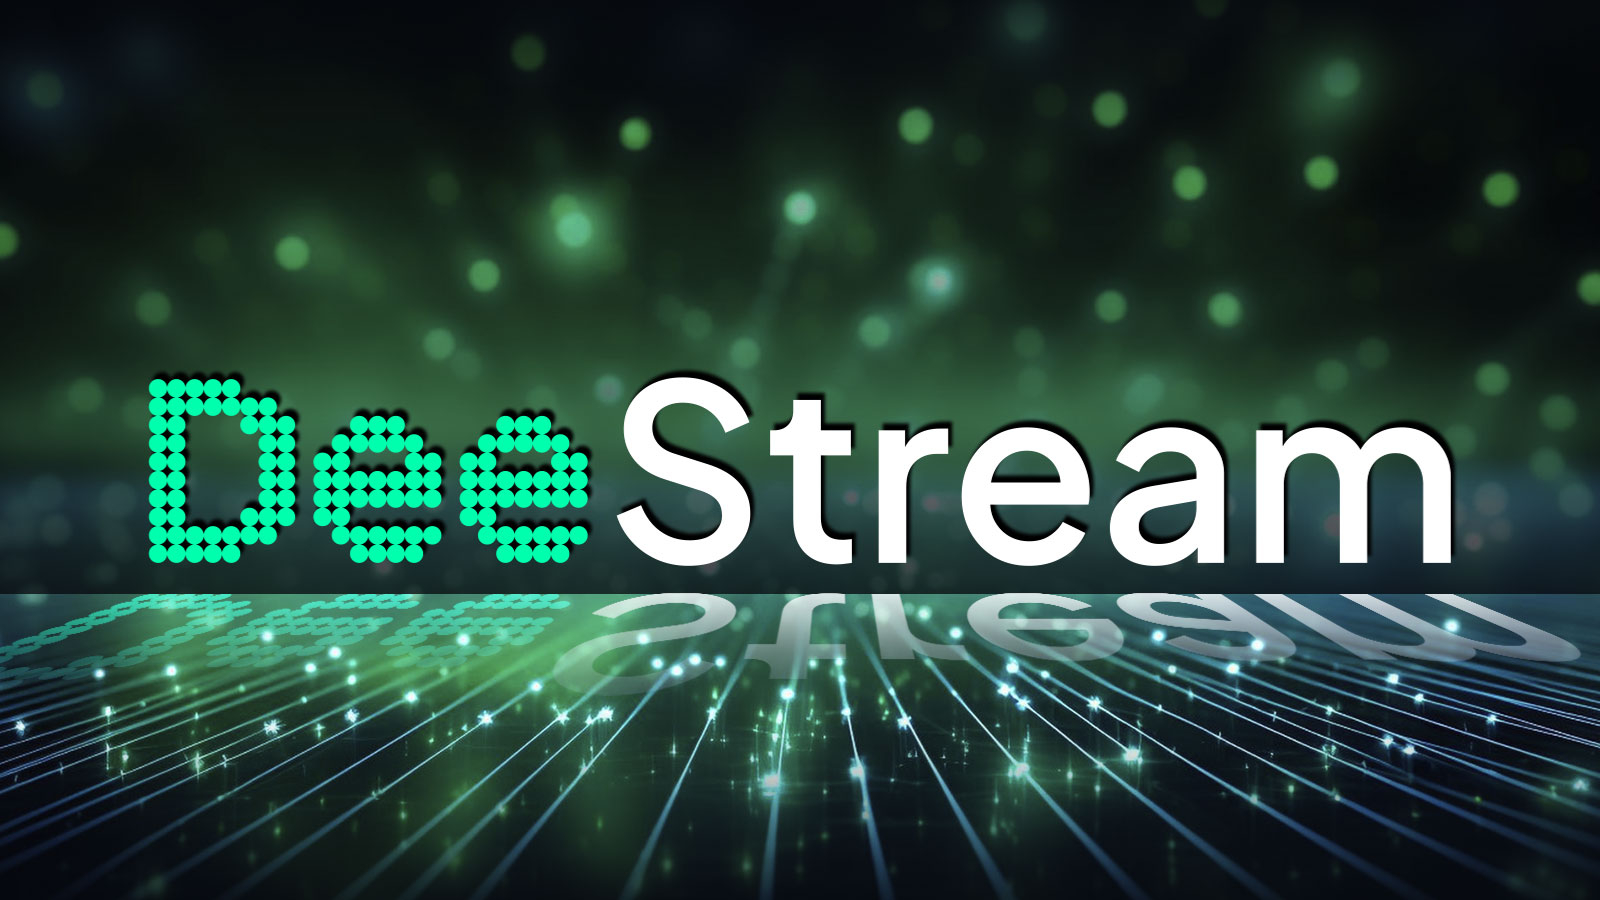 DeeStream (DST) Multi-Stage Cryptocurrency Pre-Sale Gaining Steam in March as Bitcoin (BTC), Ethereum (ETH) Target New Trading Volume Records